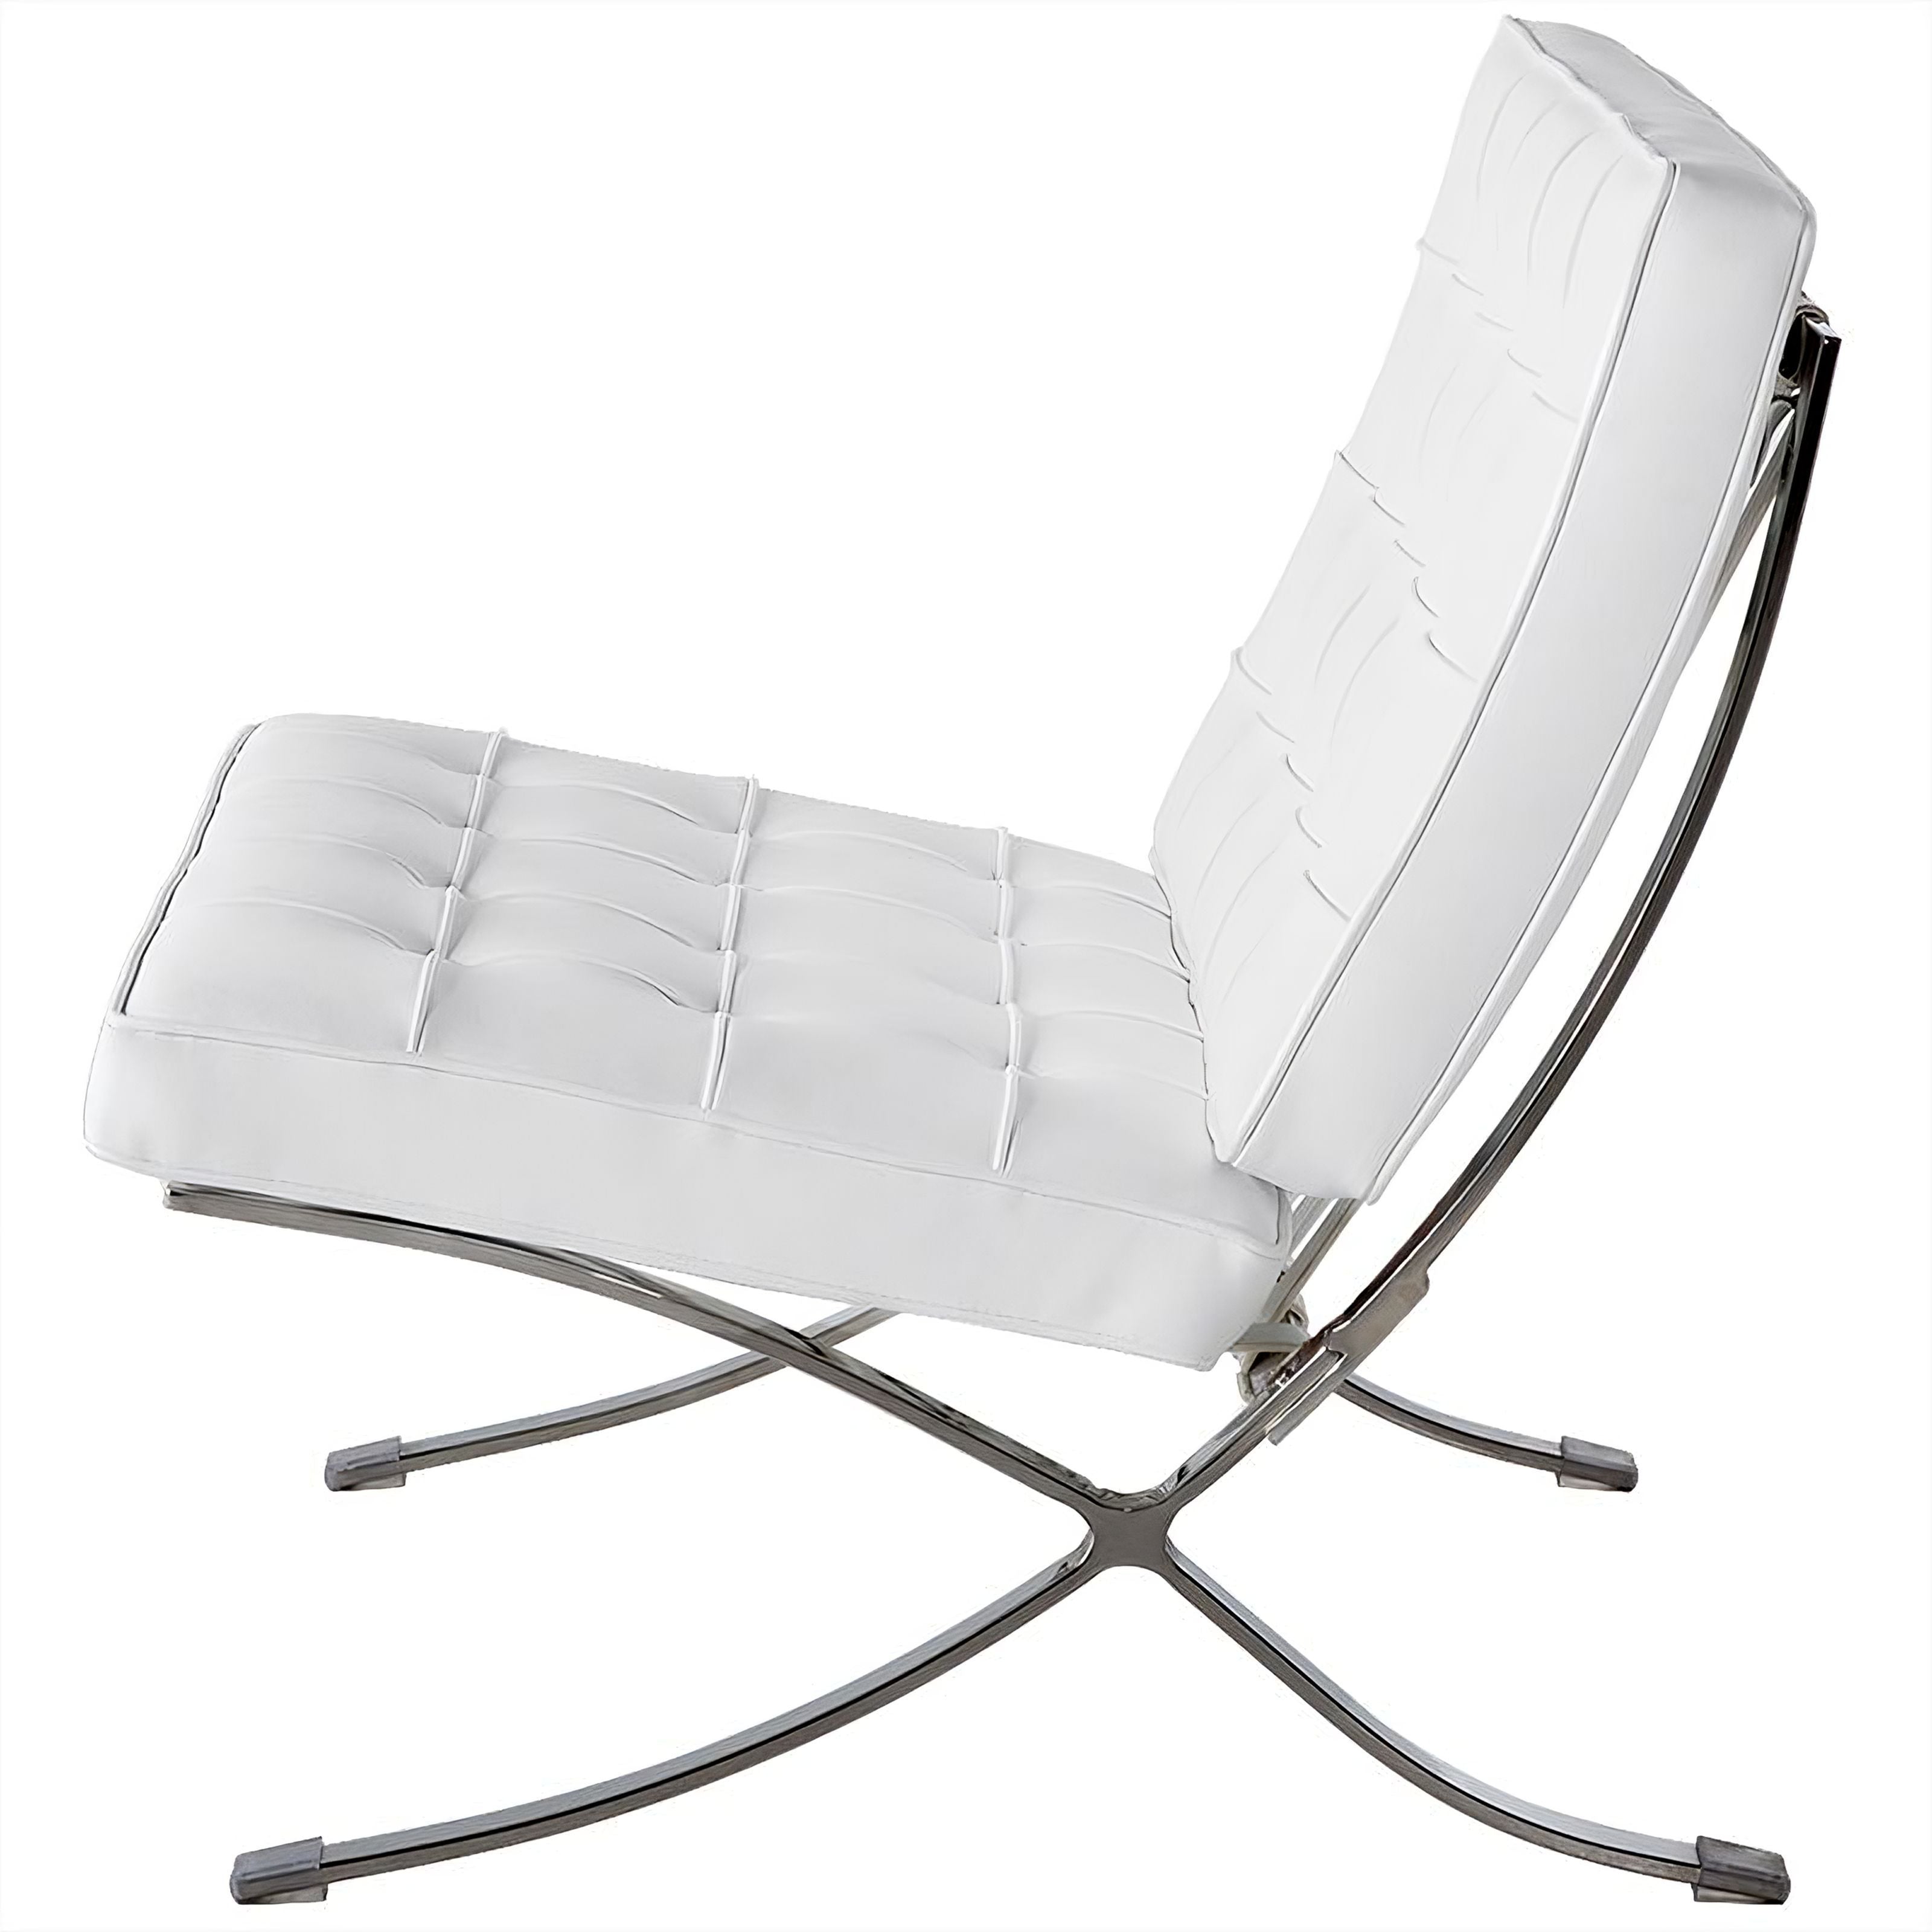 Ludwig Mies van der Rohe Barcelona Pavilion Chair, Full-Grain Leather and Steel